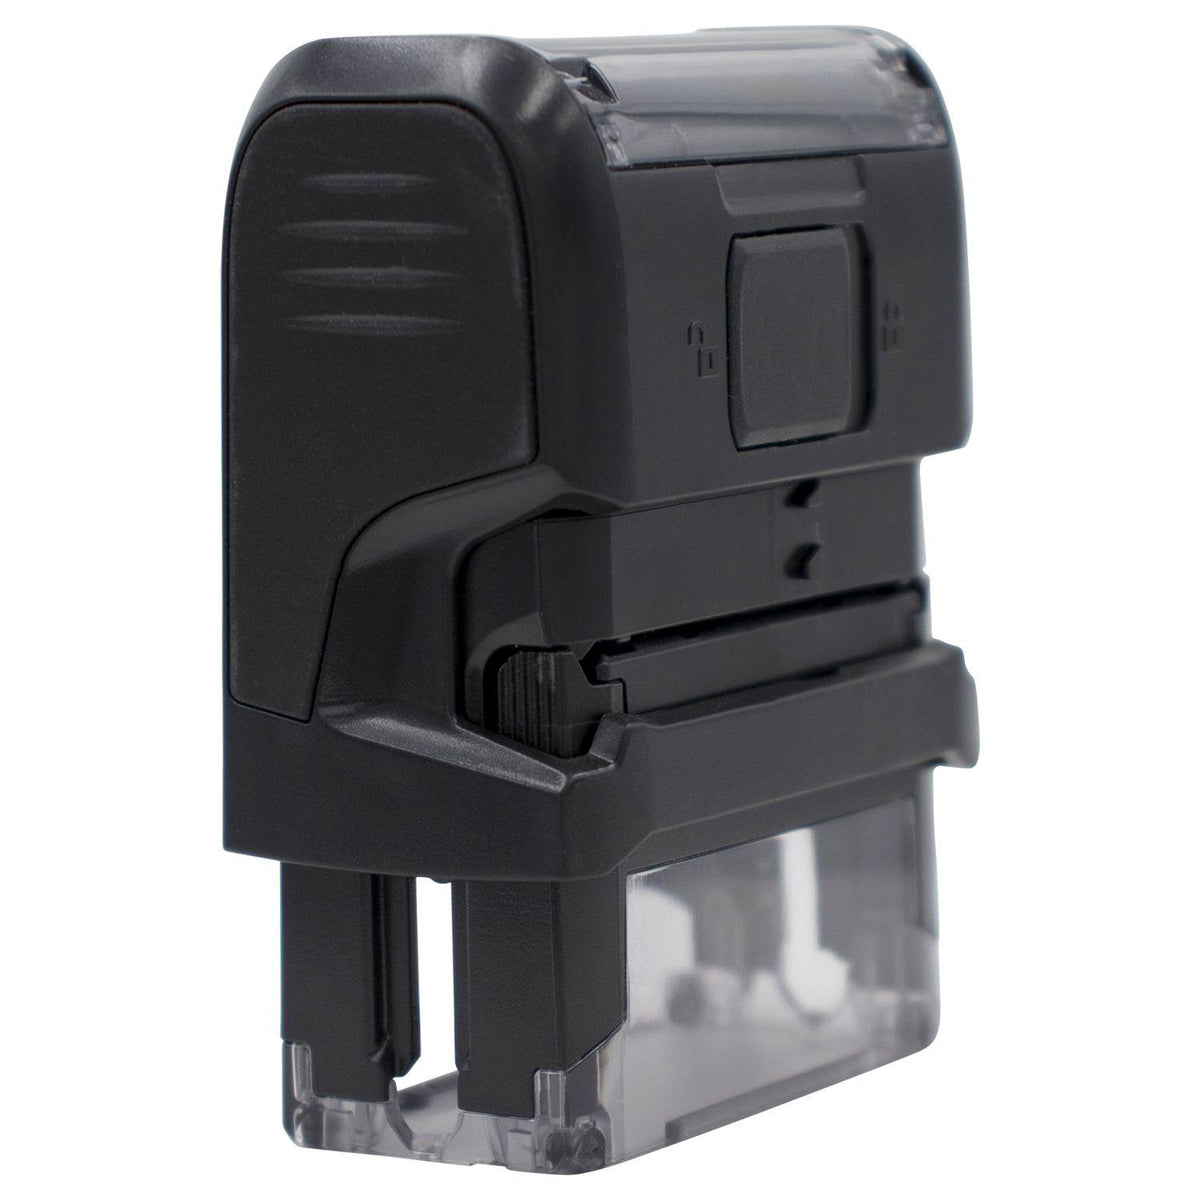 Large Self-Inking Confirmation of Phone Order Stamp Back View